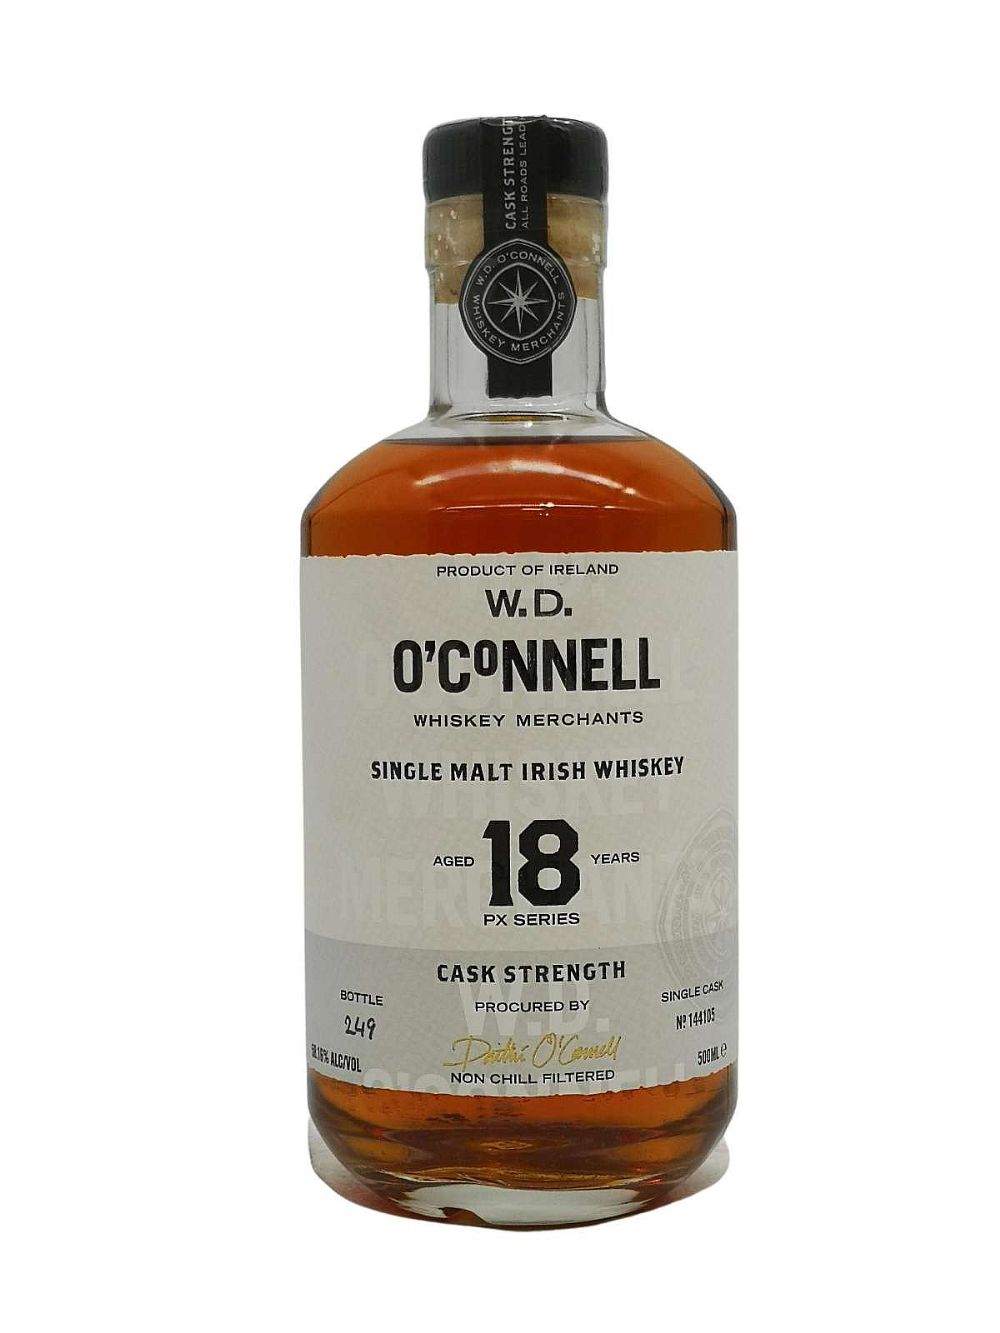 WD O'Connell 18 year old PX Finish